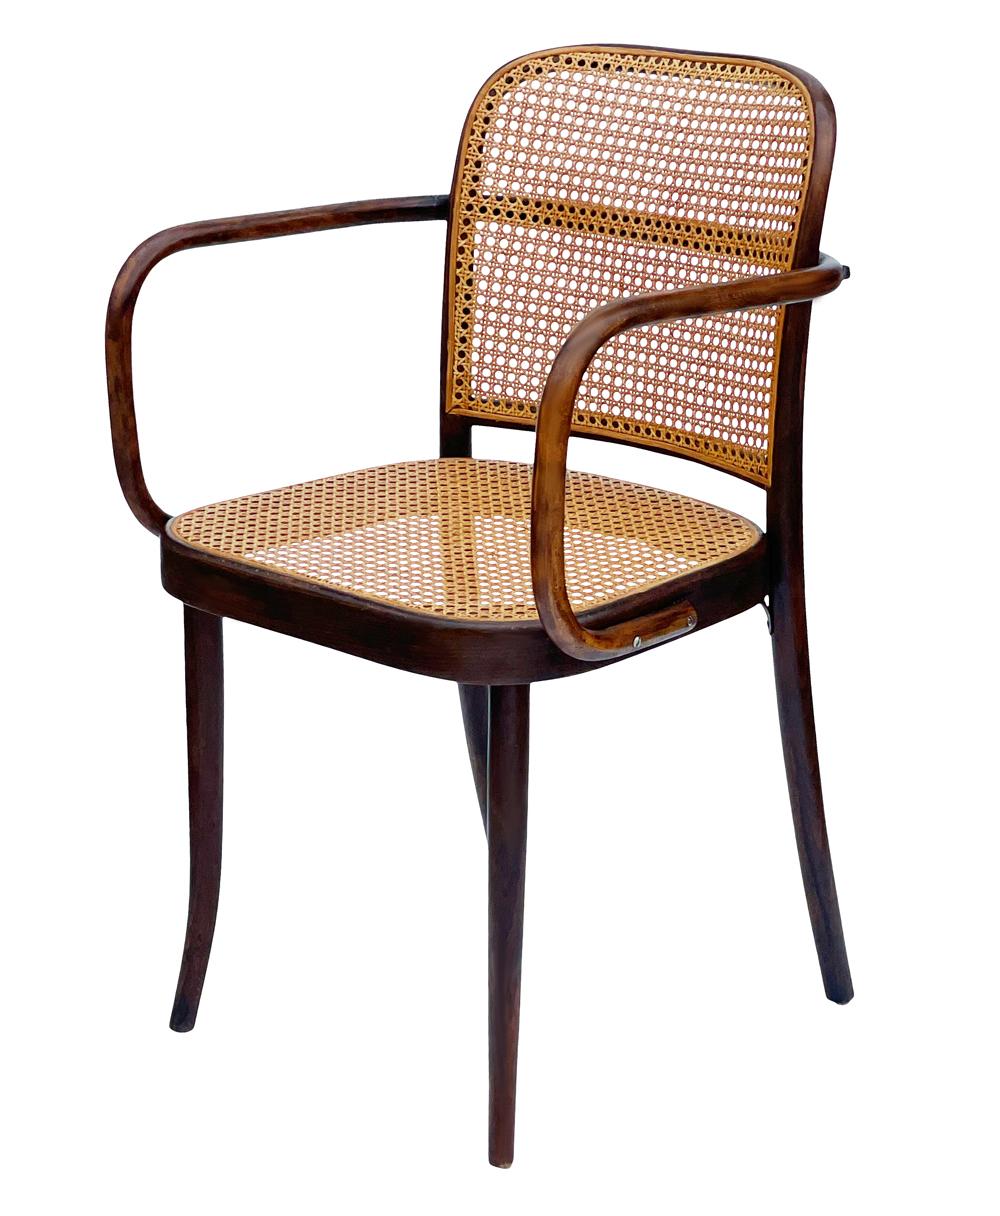 Mid-20th Century Set of 6 Mid-Century Modern Dining Prague Chairs by Josef Hoffmann Cane & Wood